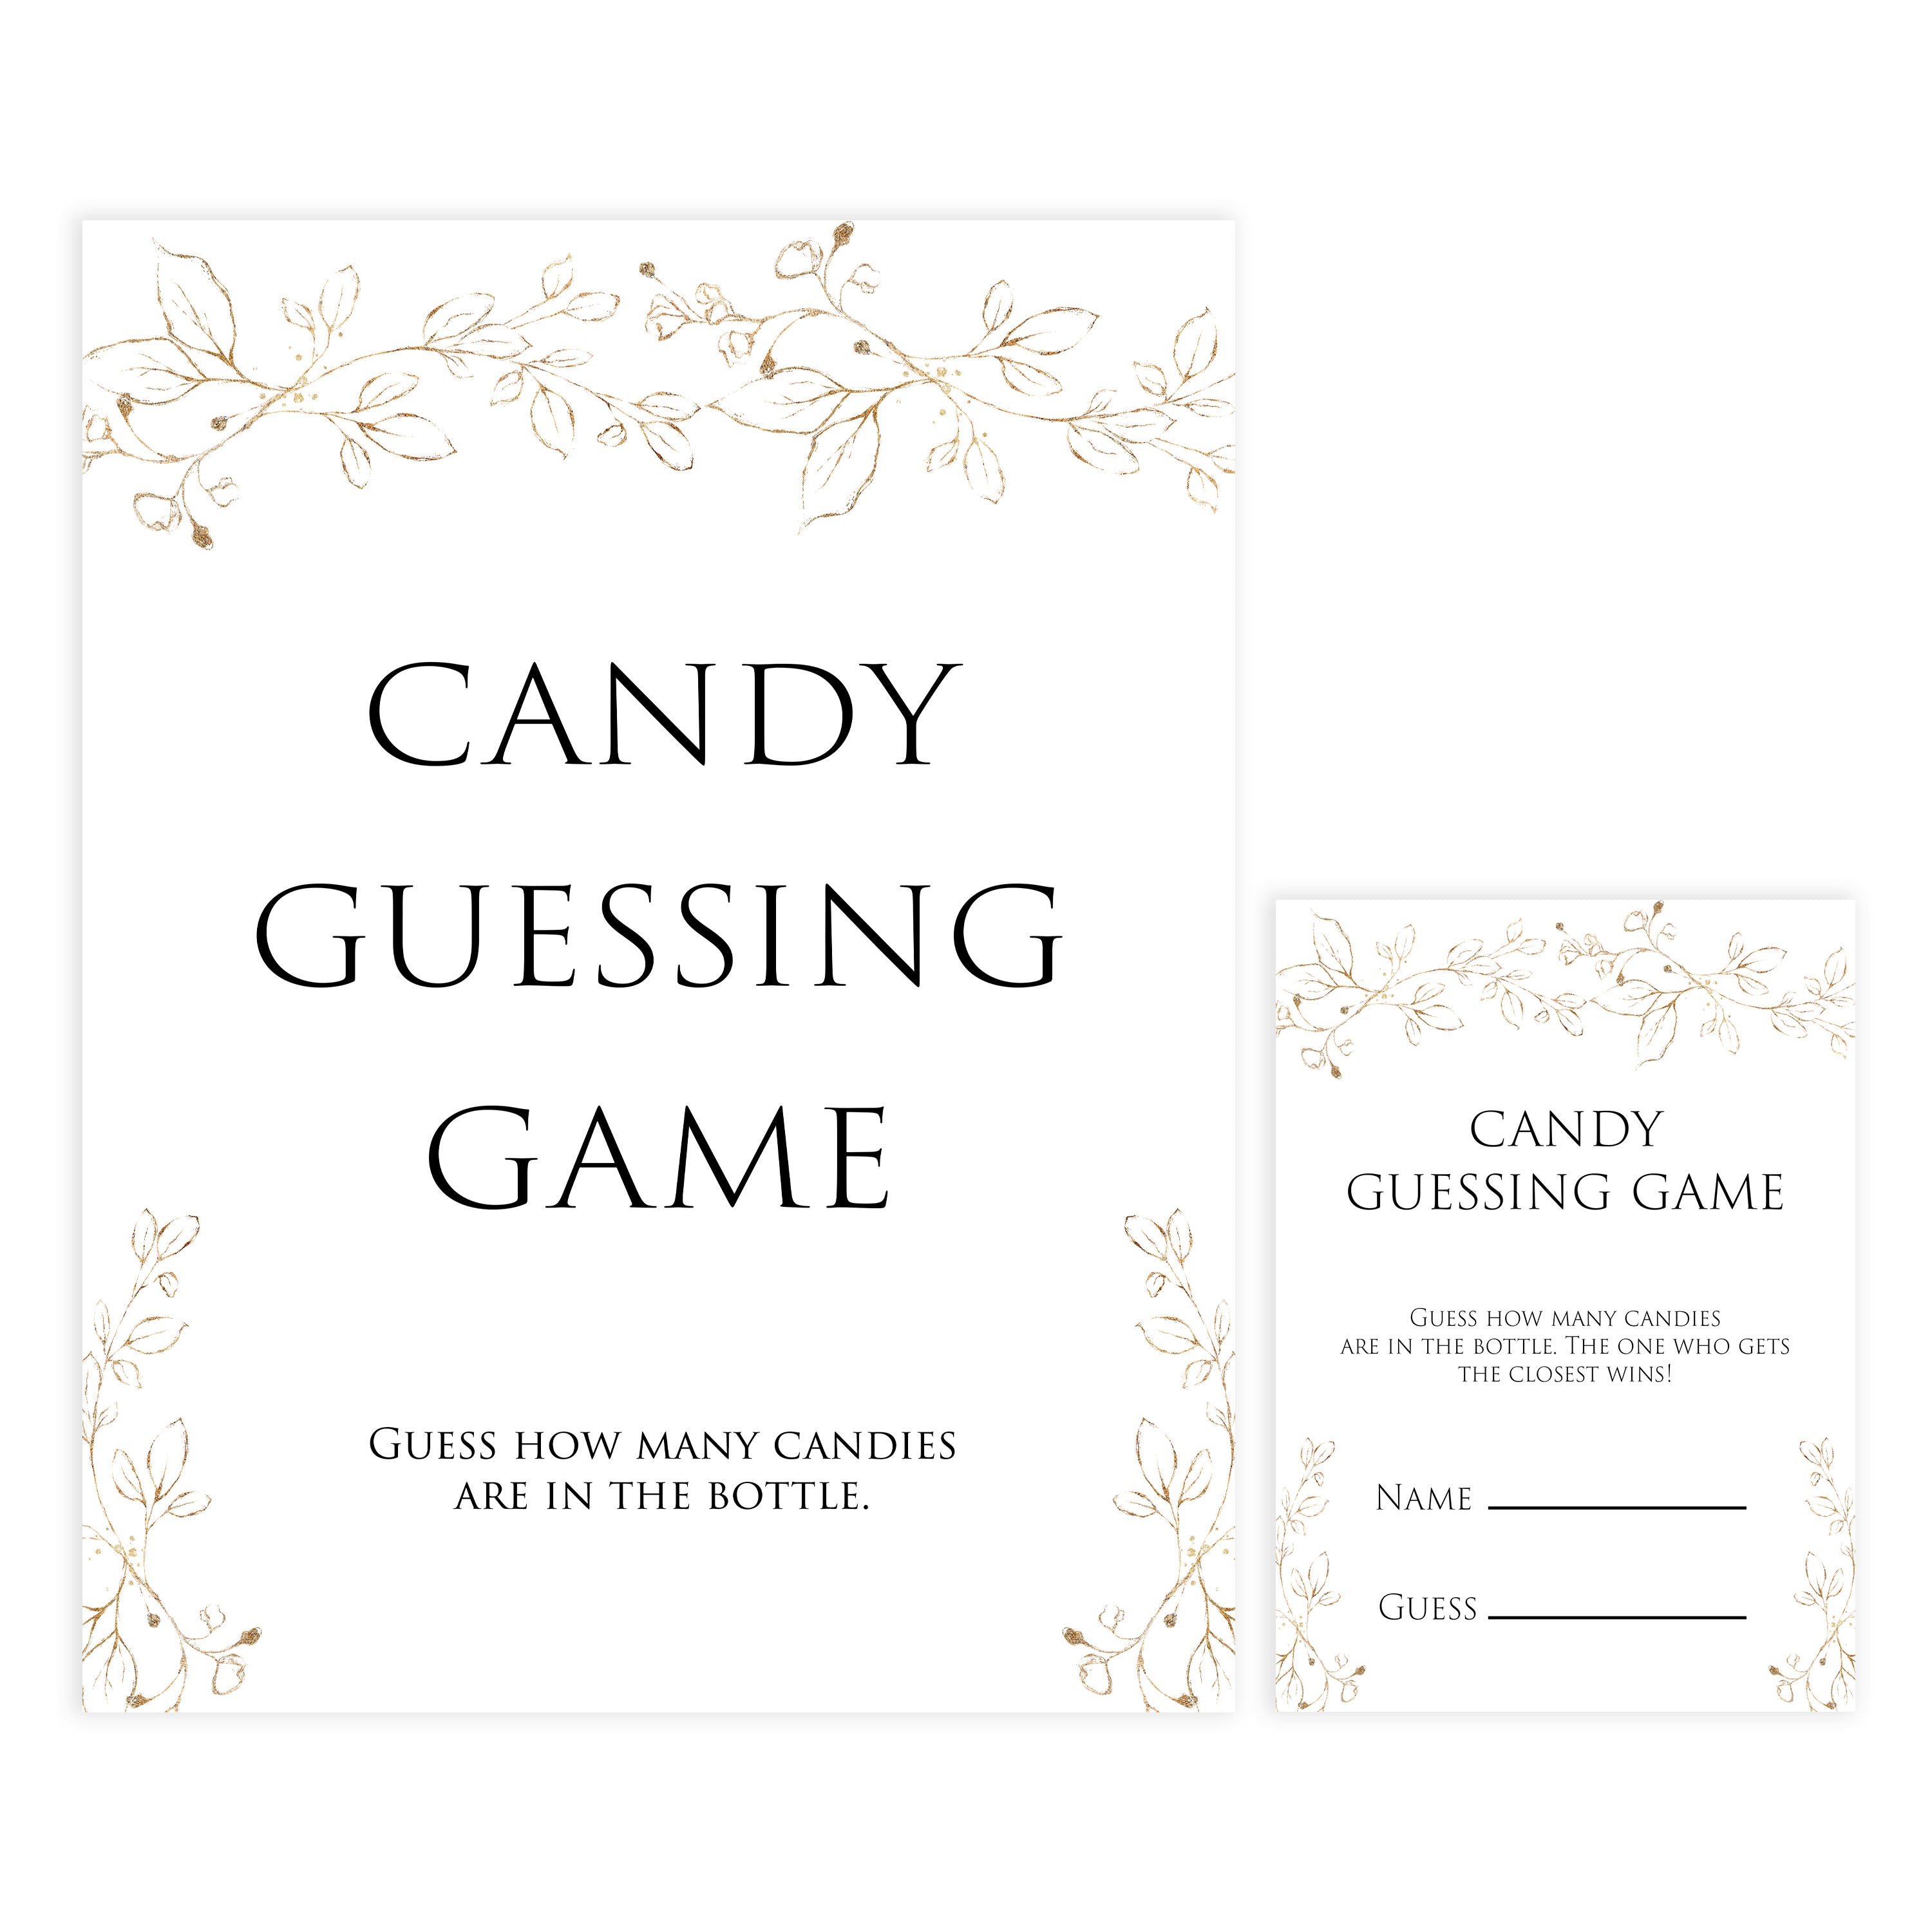 candy guessing game, Printable baby shower games, gold leaf baby games, baby shower games, fun baby shower ideas, top baby shower ideas, gold leaf baby shower, baby shower games, fun gold leaf baby shower ideas